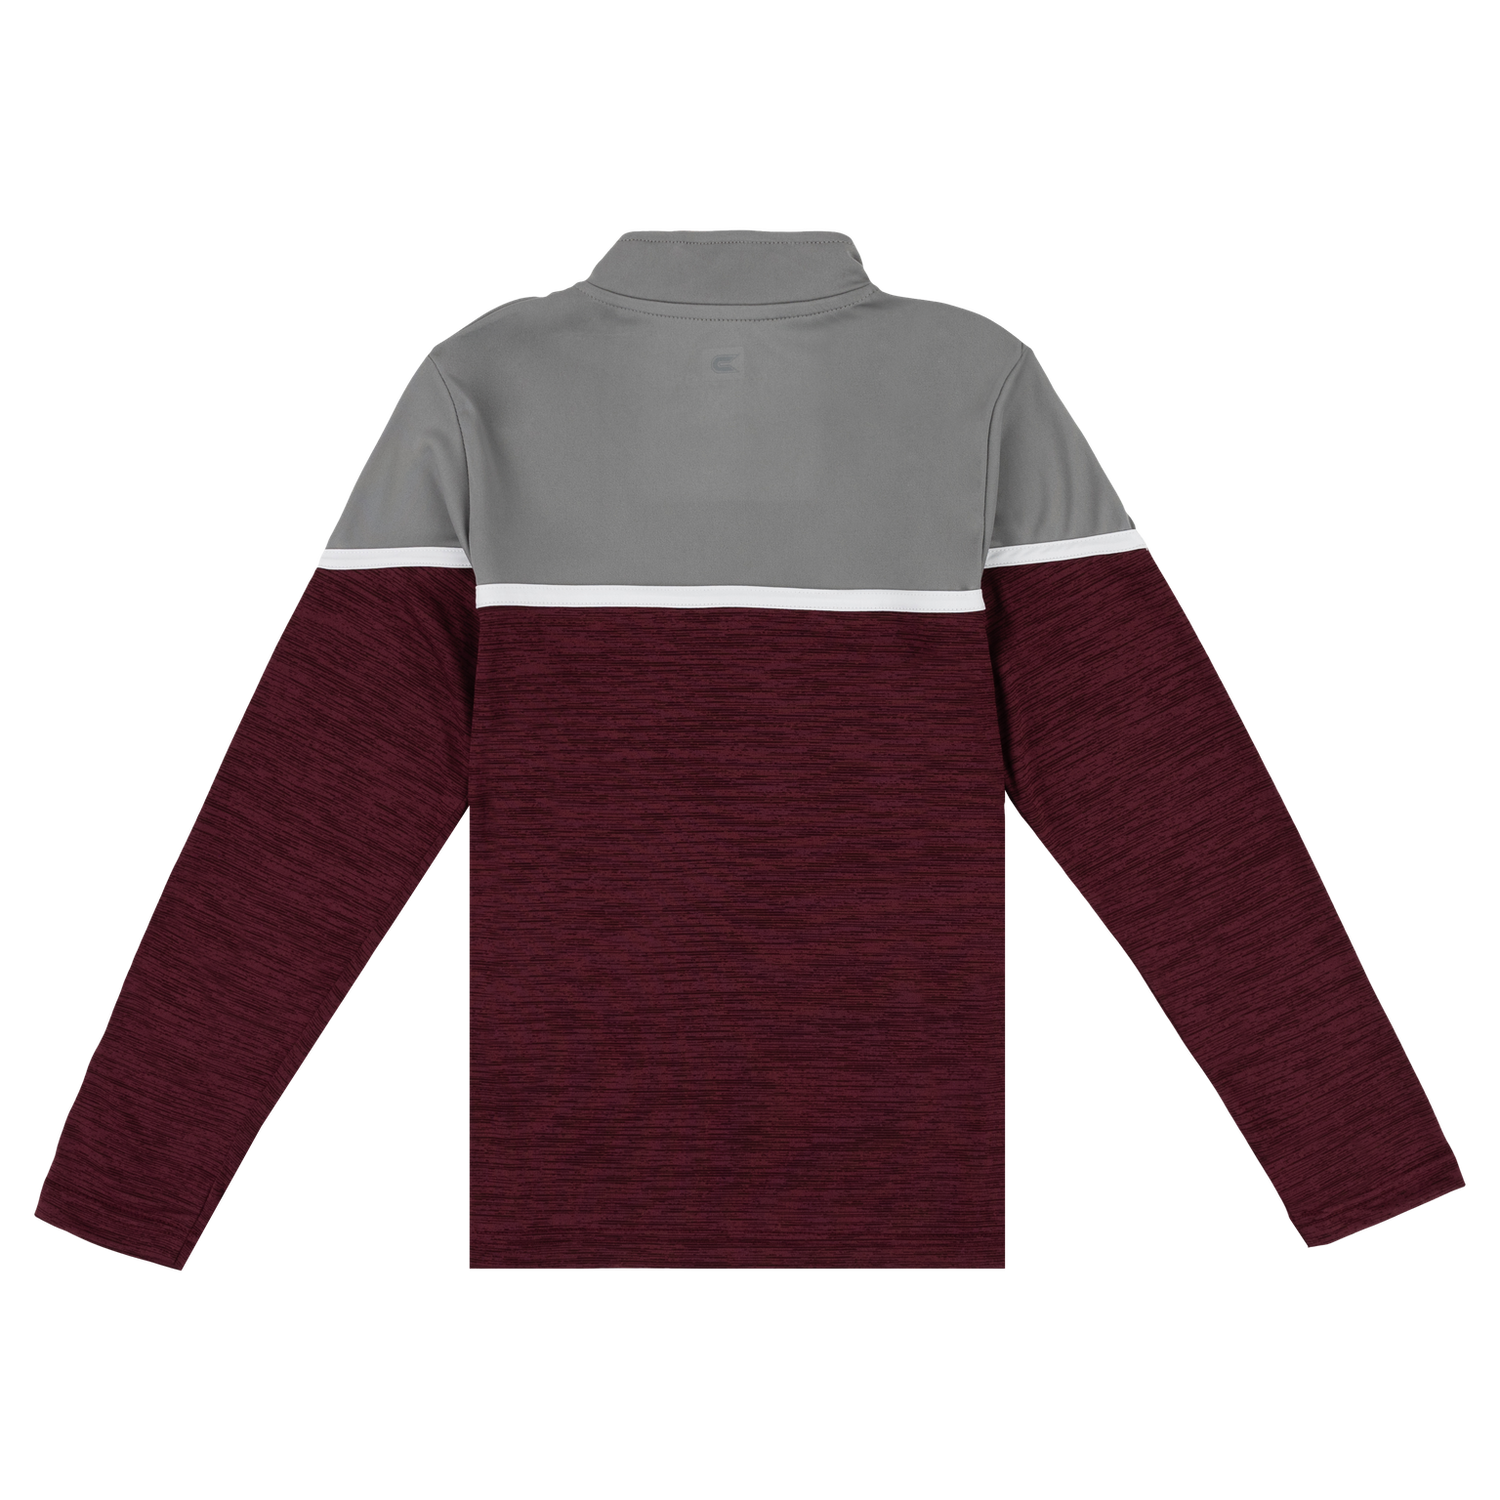 Texas A&M Youth Billy Quarter Zip